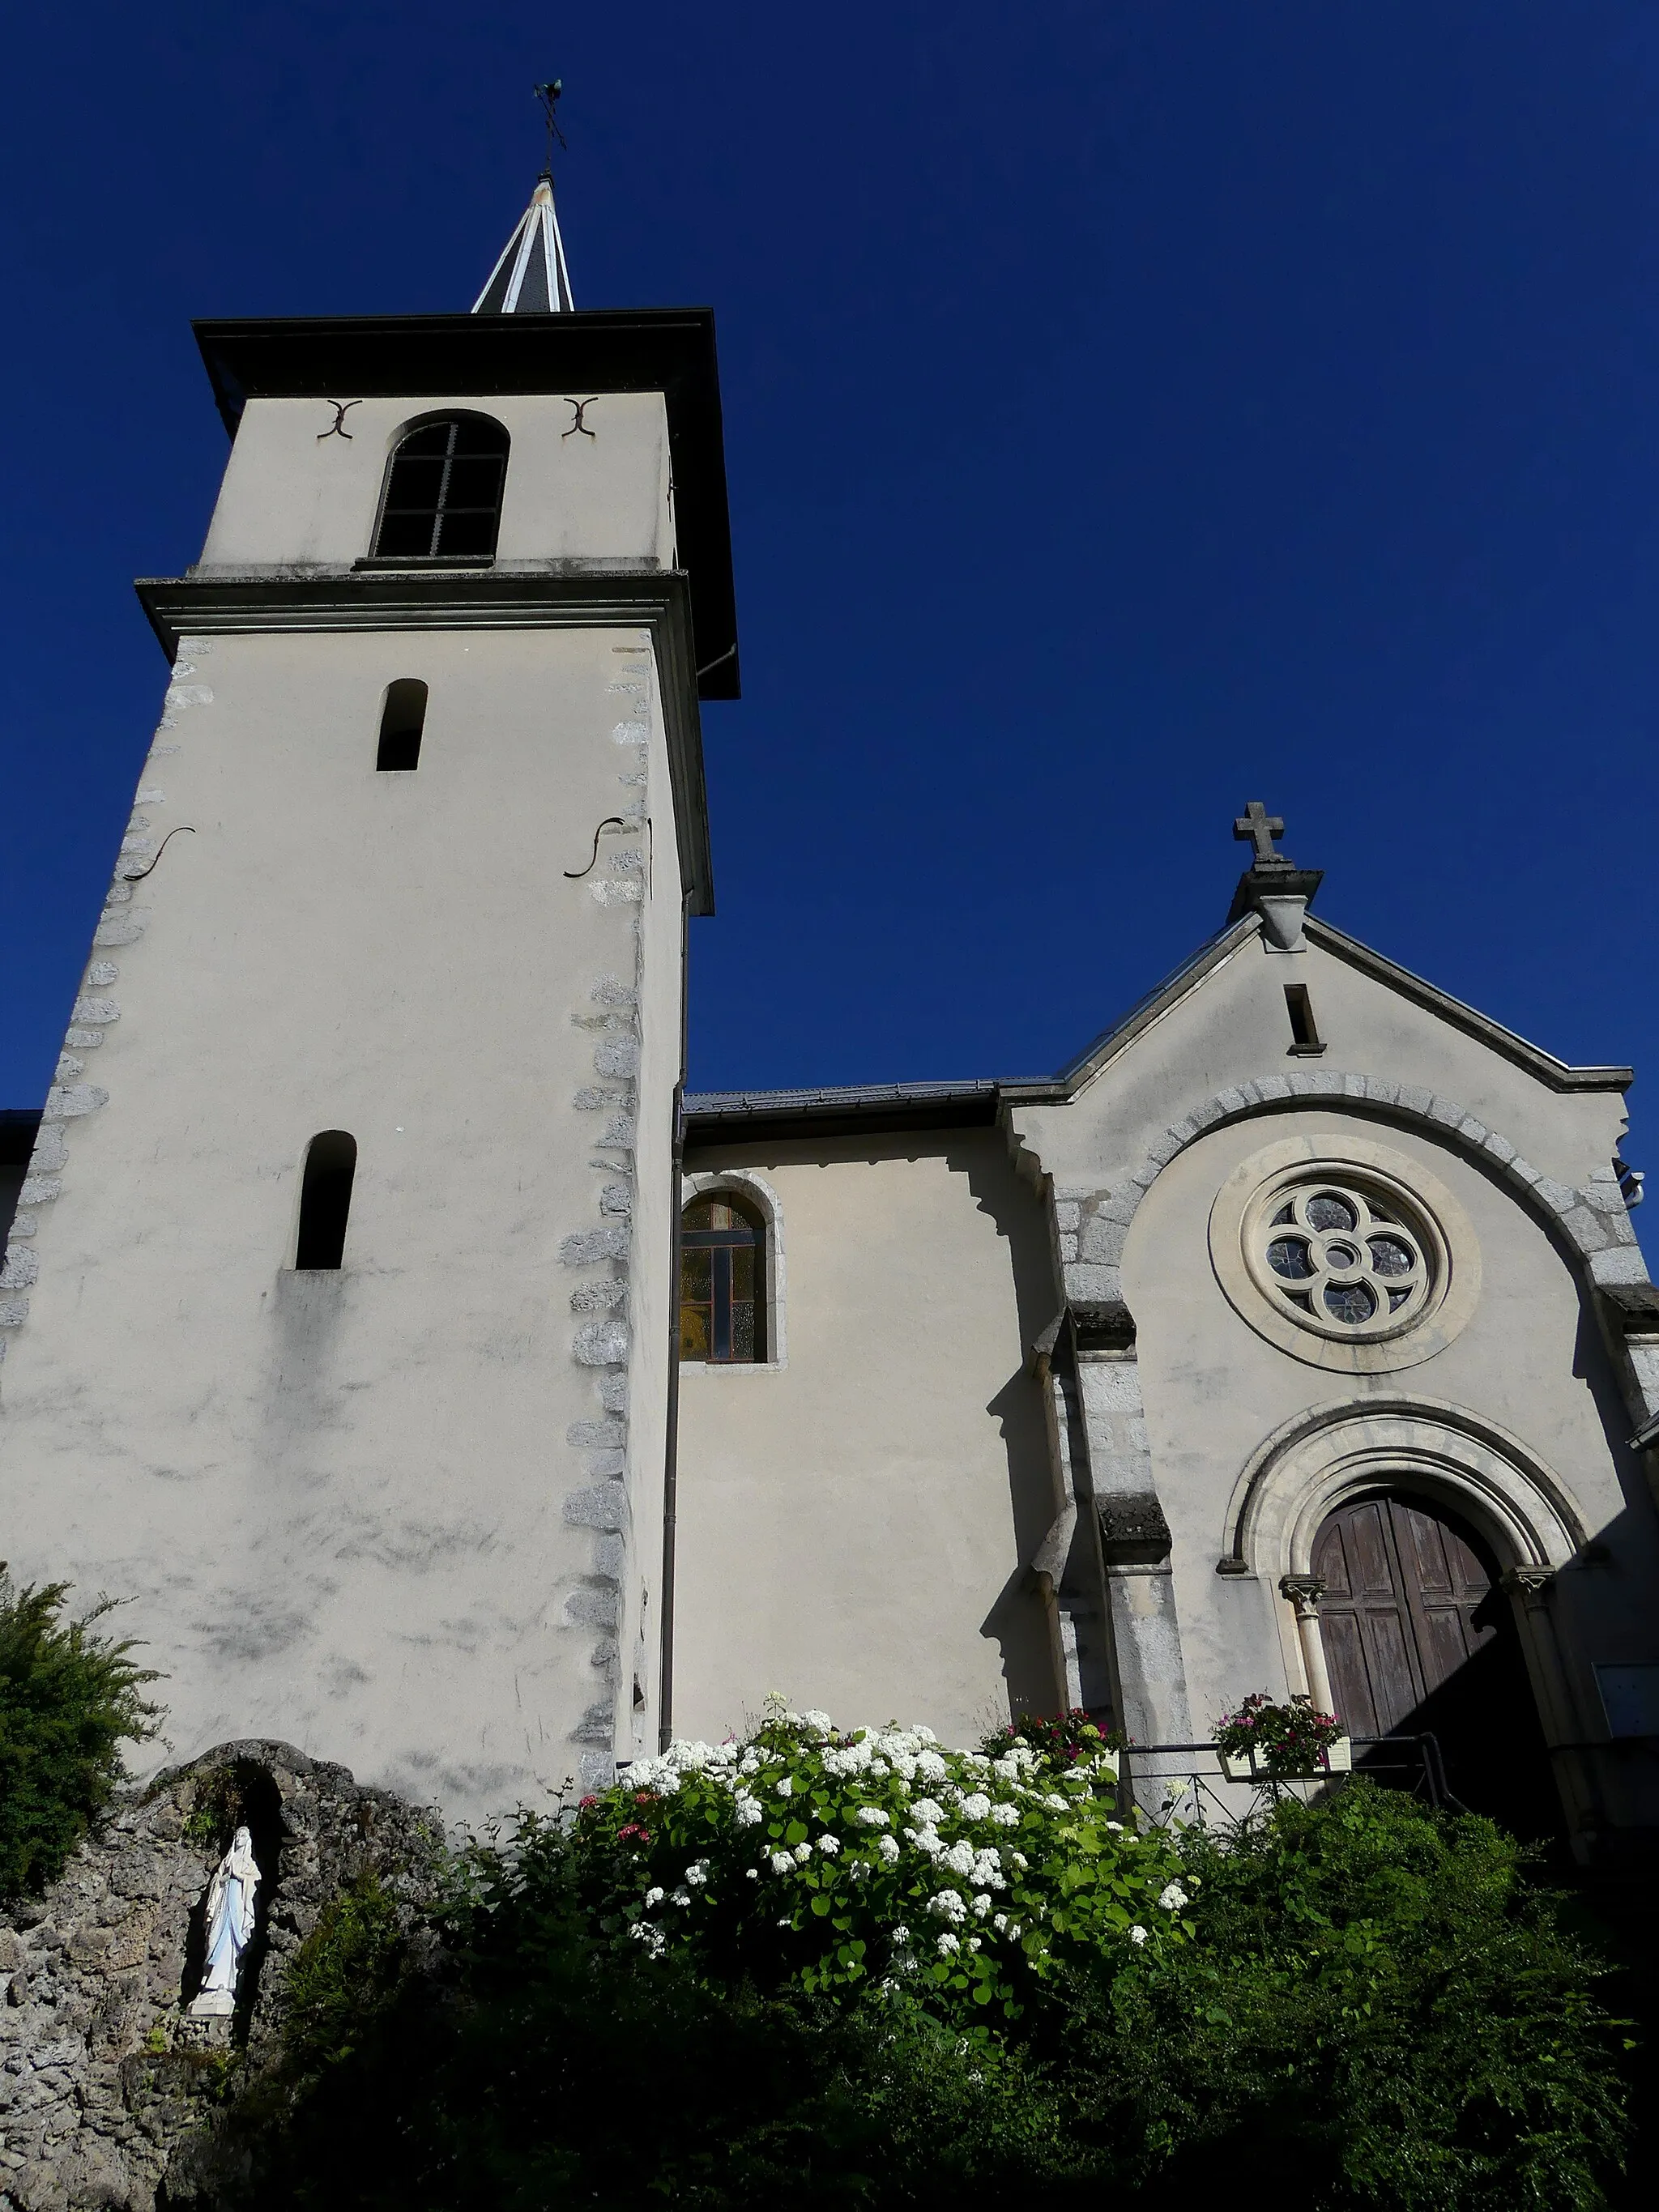 Photo showing: Sight, in the evening, of the north-western side of Église Saint-Trophime in Tournon, Savoie, France.